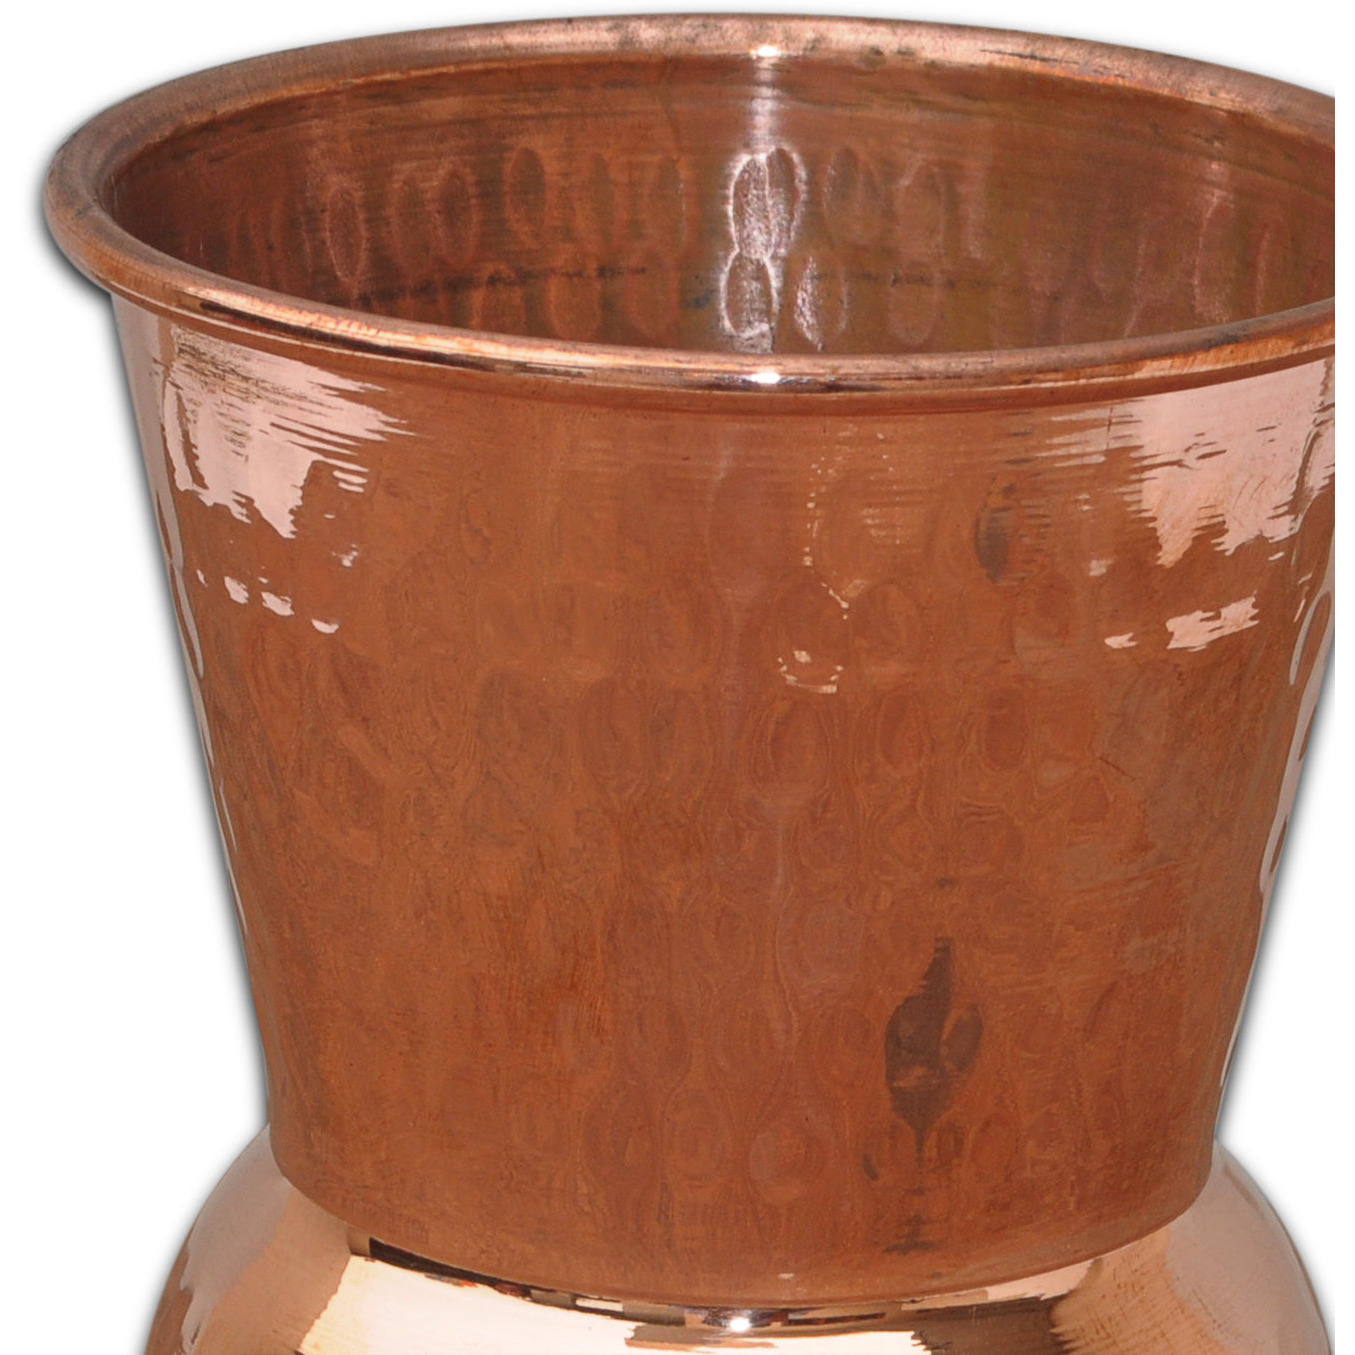 Indian Handmade Pure Copper Water Tumbler Ayurveda Benefit Copper Pitcher  Indian Copper Glass Hammered Glass